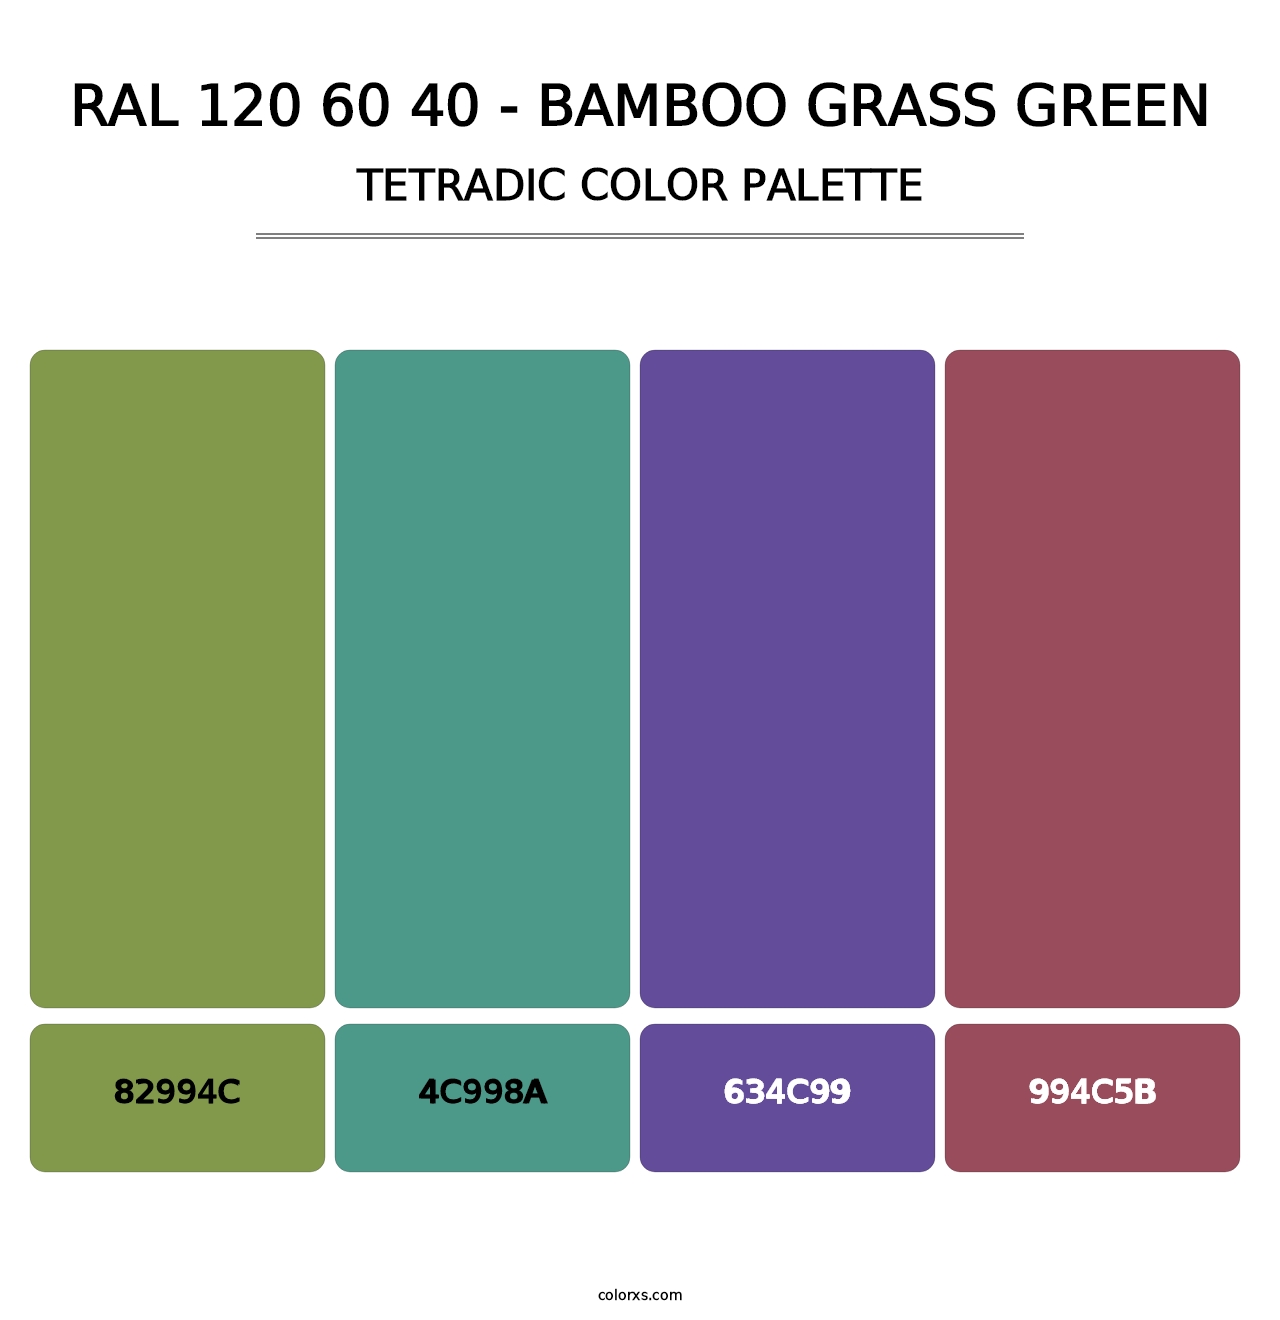 RAL 120 60 40 - Bamboo Grass Green - Tetradic Color Palette